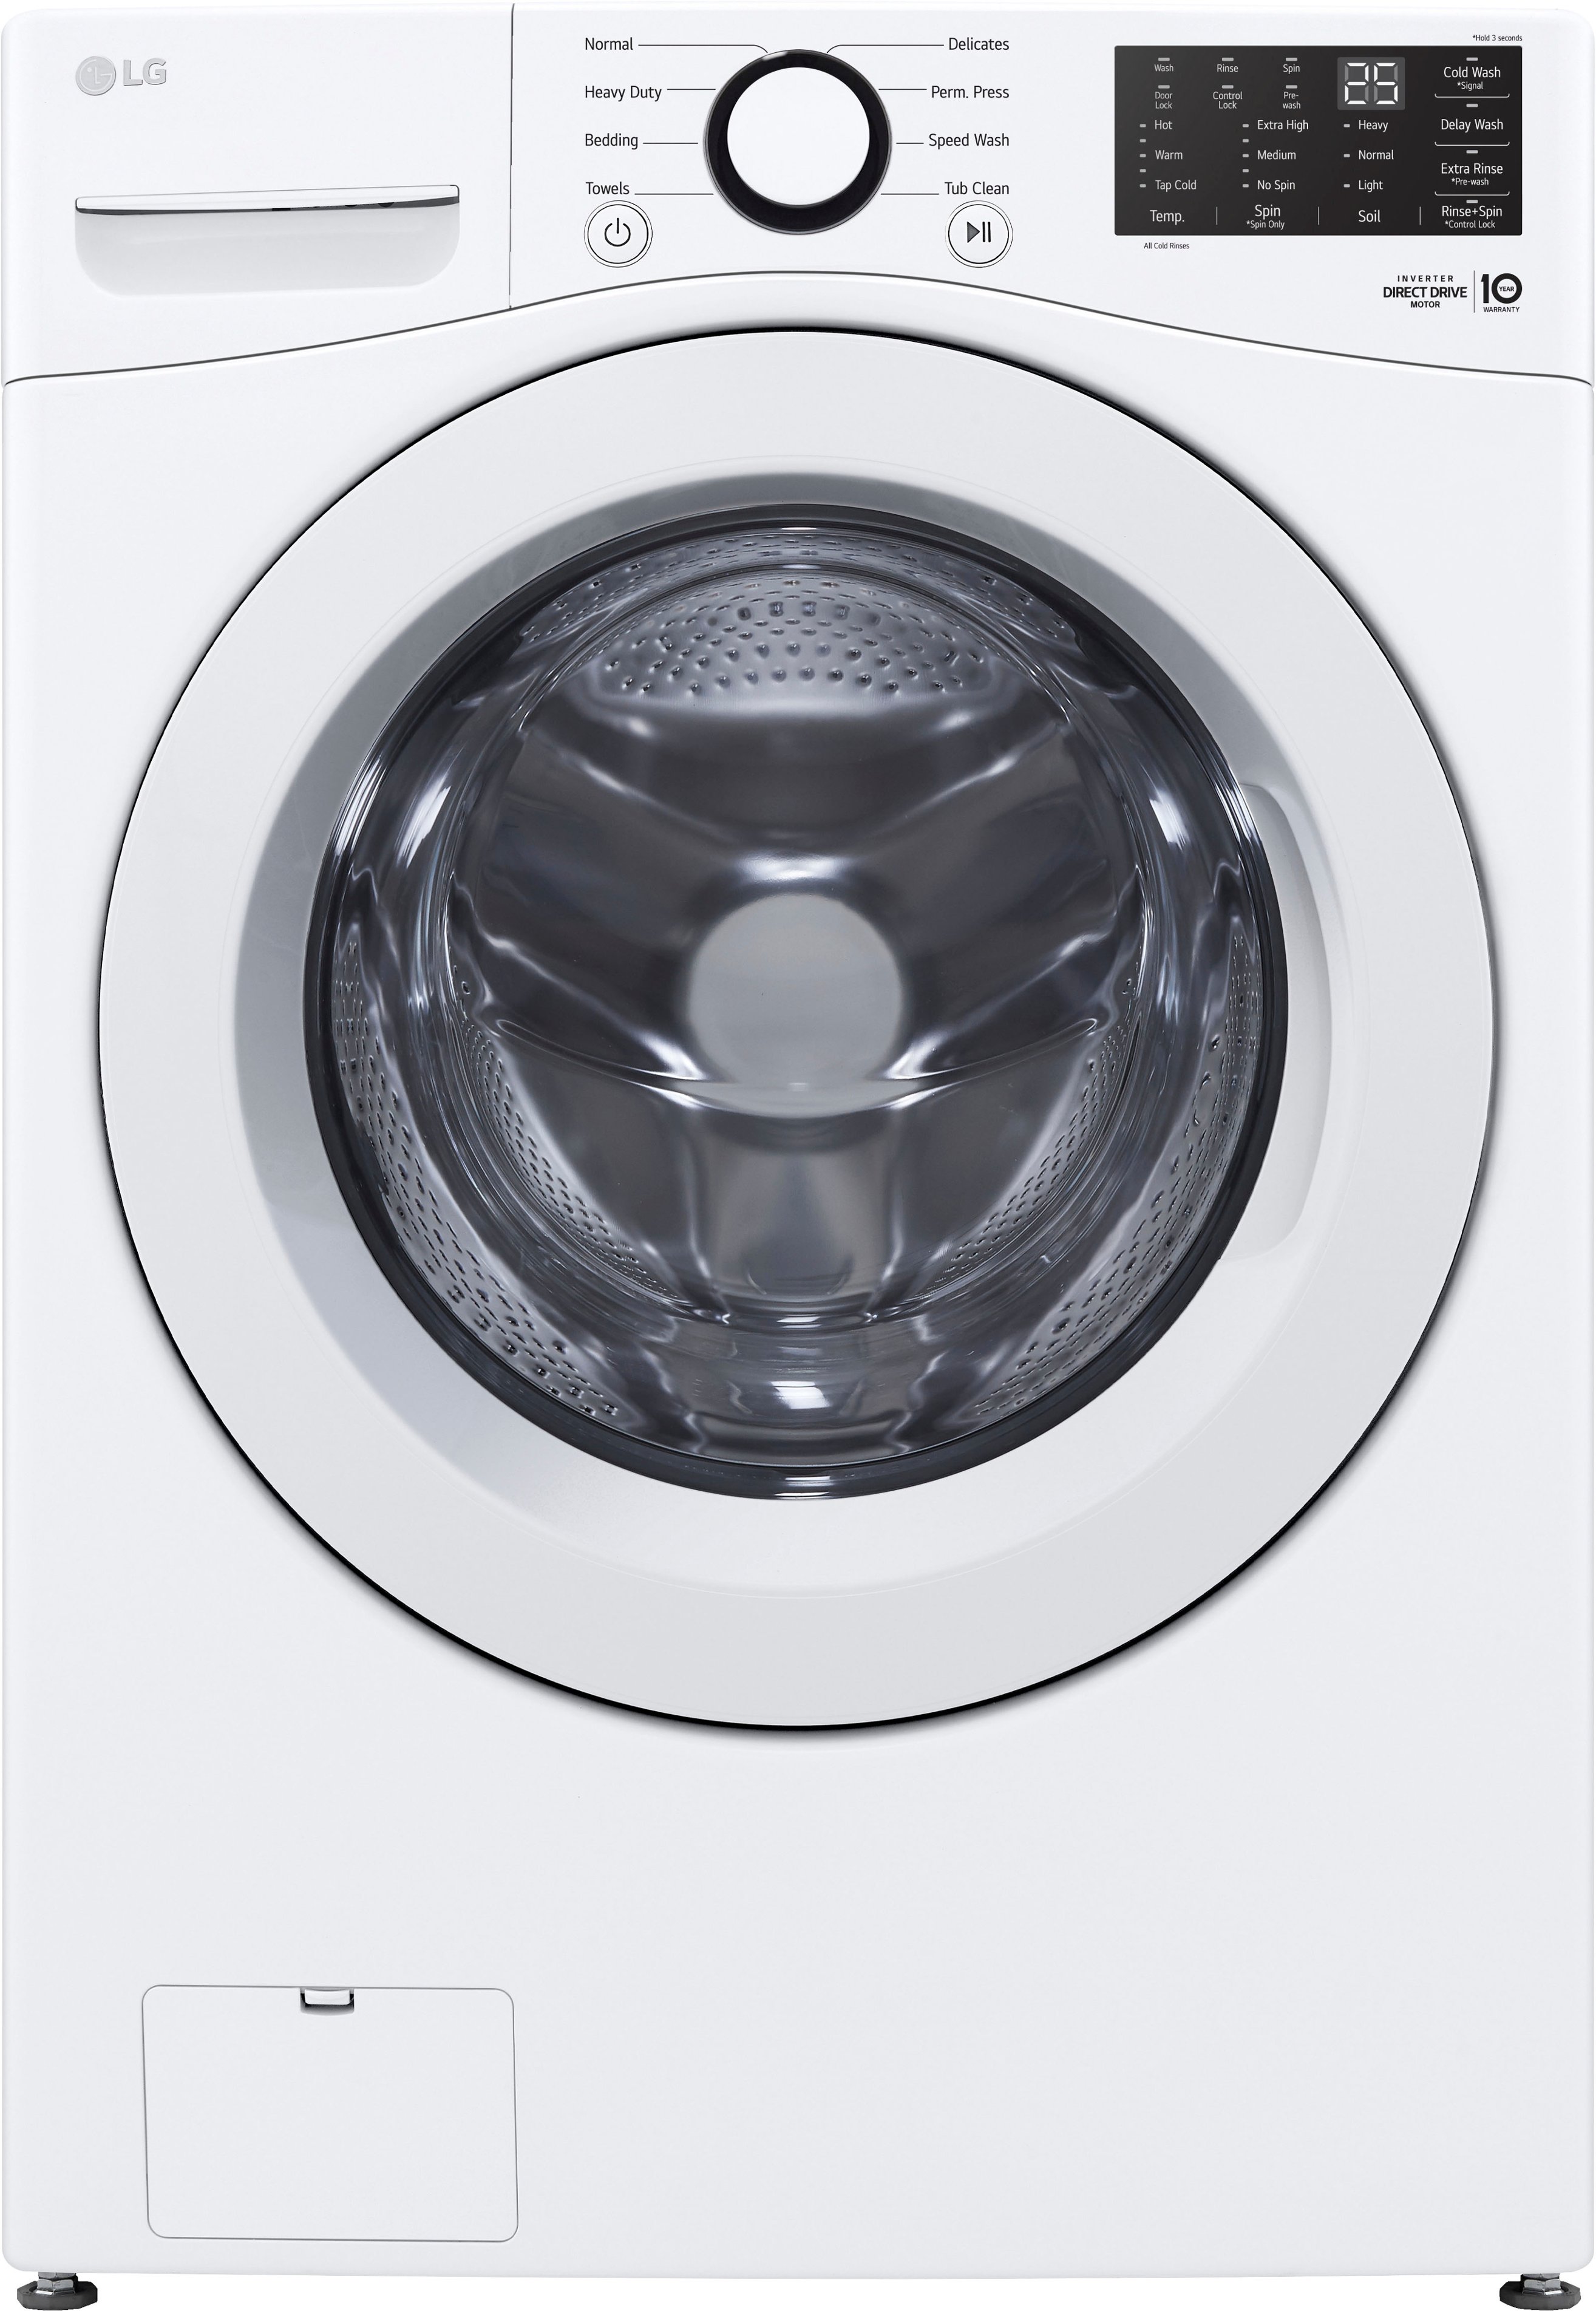 Front loading washers – what are they and should you buy one?